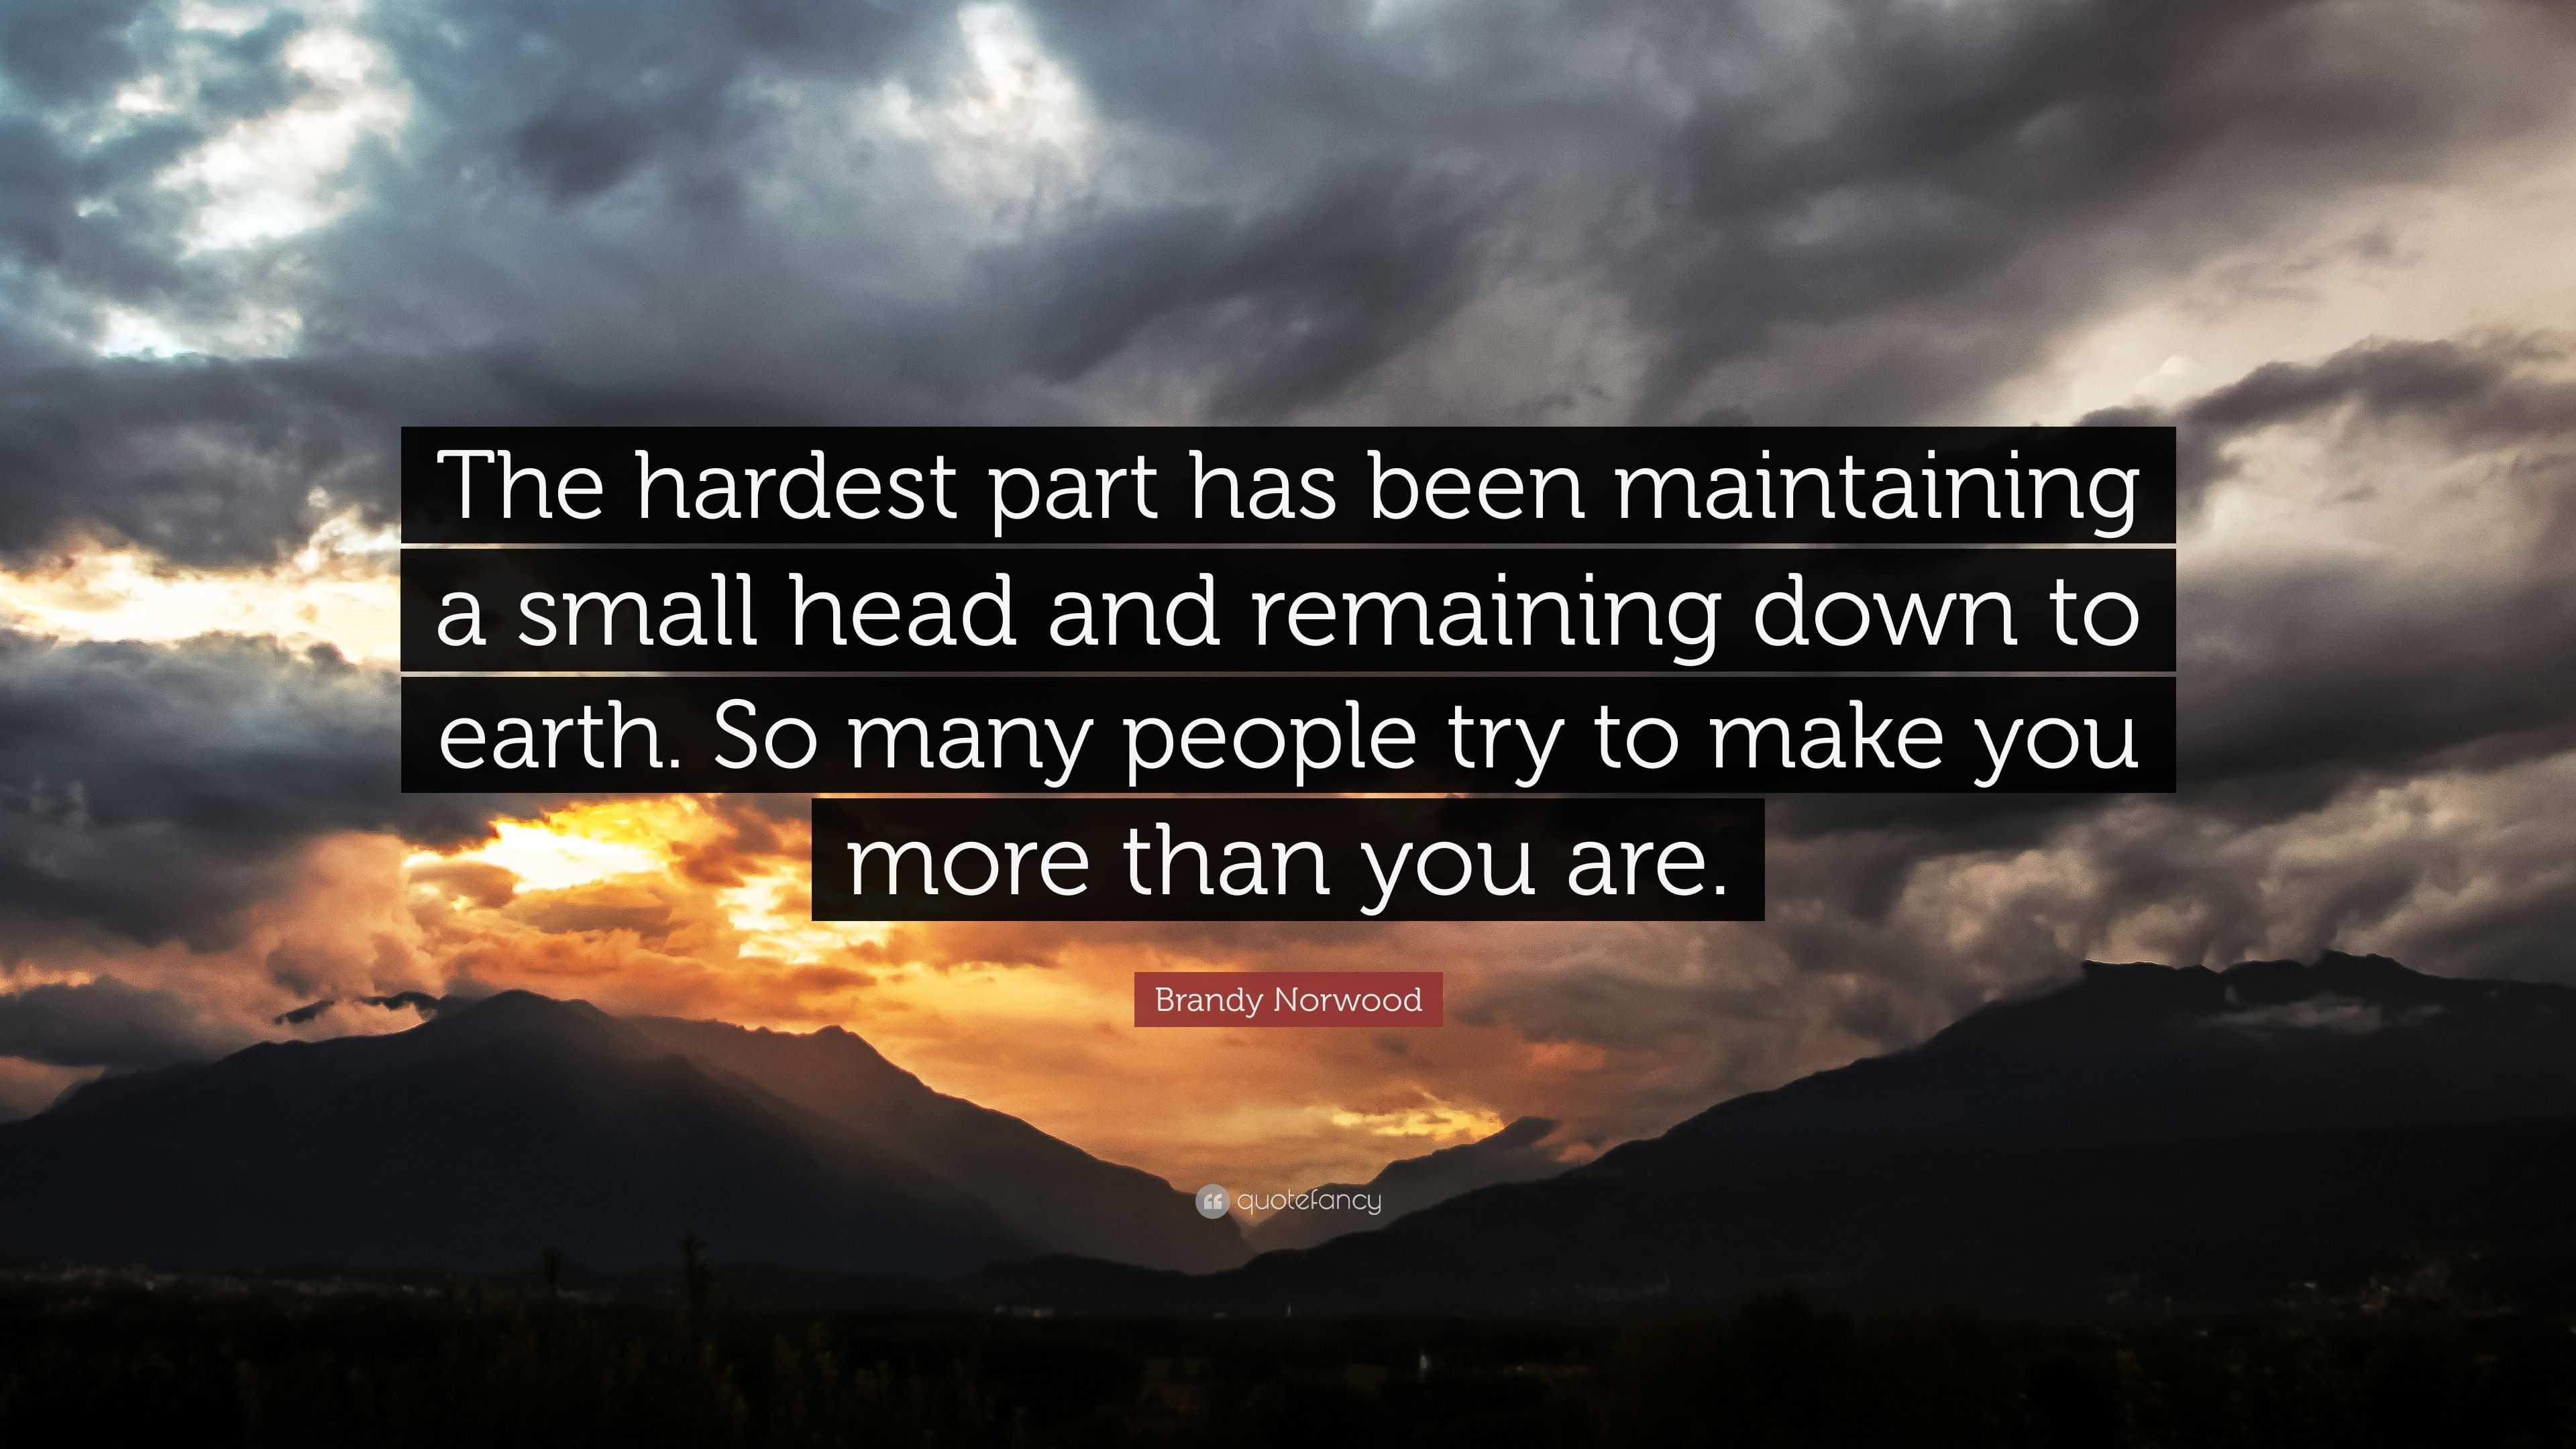 Brandy Norwood Quote: “The hardest part has been maintaining a small head  and remaining down to earth. So many people try to make you more than...”